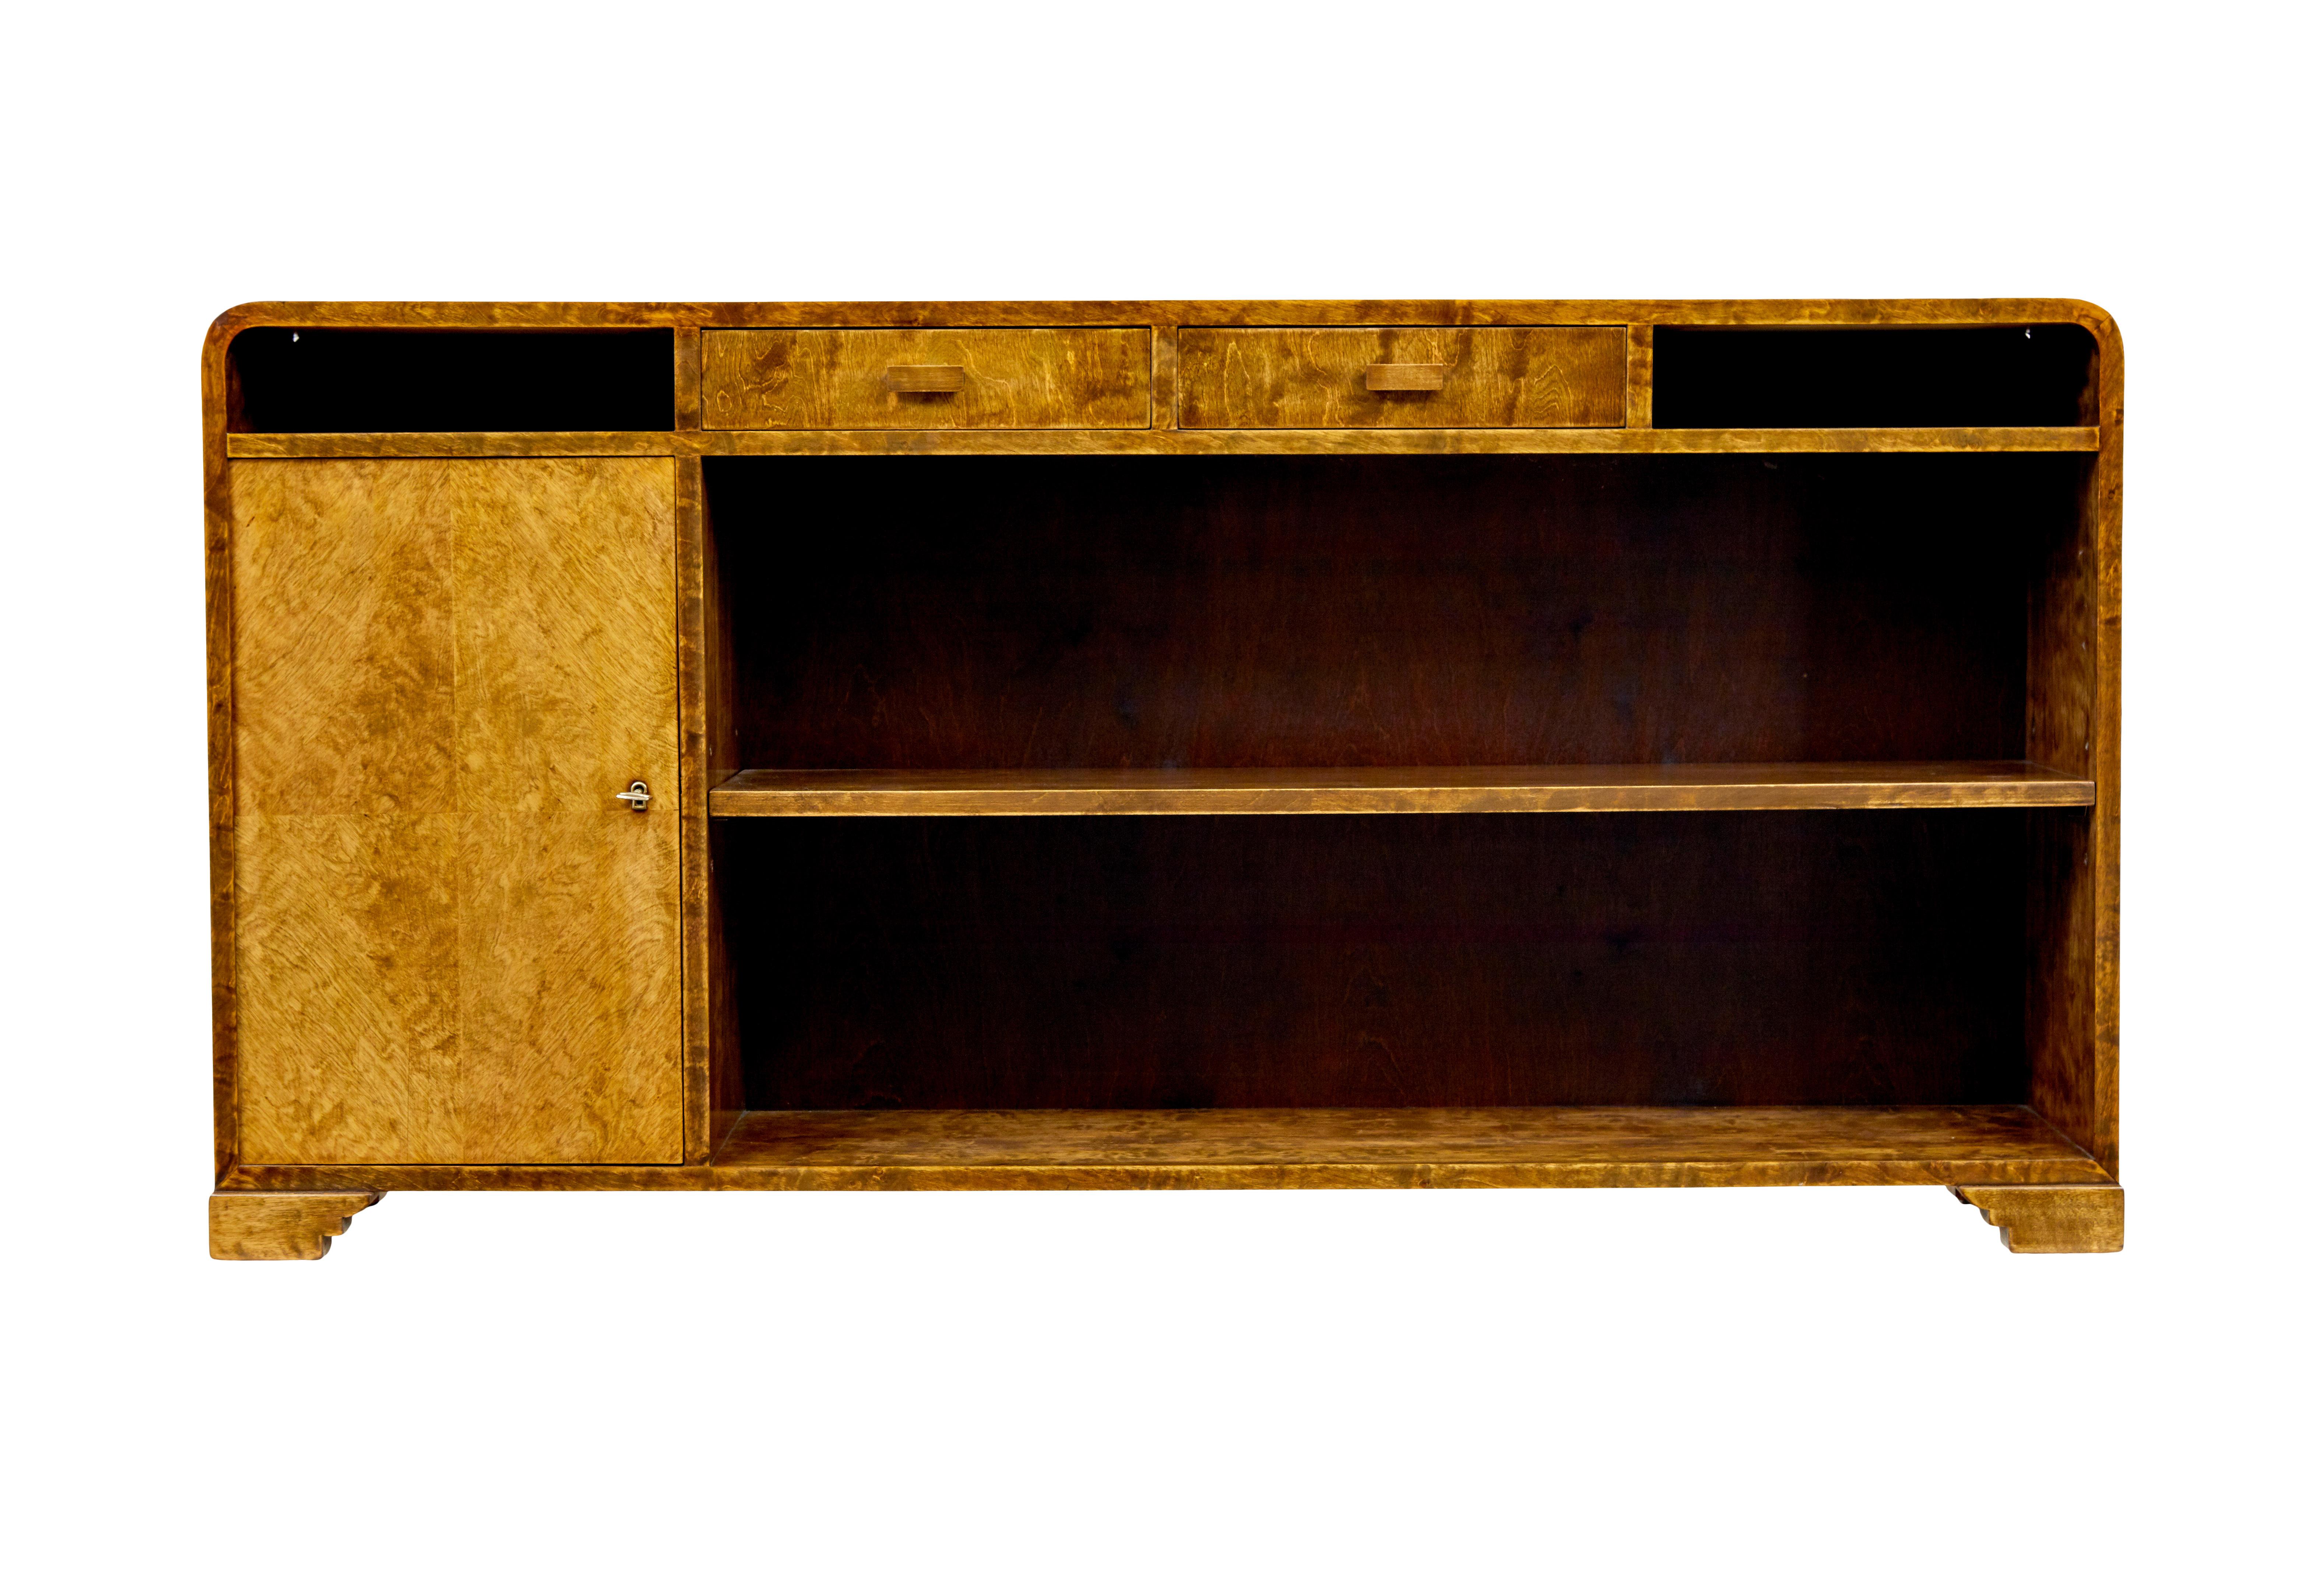 Mid 20th century Scandinavian birch bookcase by SMF Bodafors circa 1950.

Stunning burr birch low bookcase with rich golden colour.  Shaped top with 2 drawers below the top surface and 2 open apertures for storage.

Single door cupboard to the left